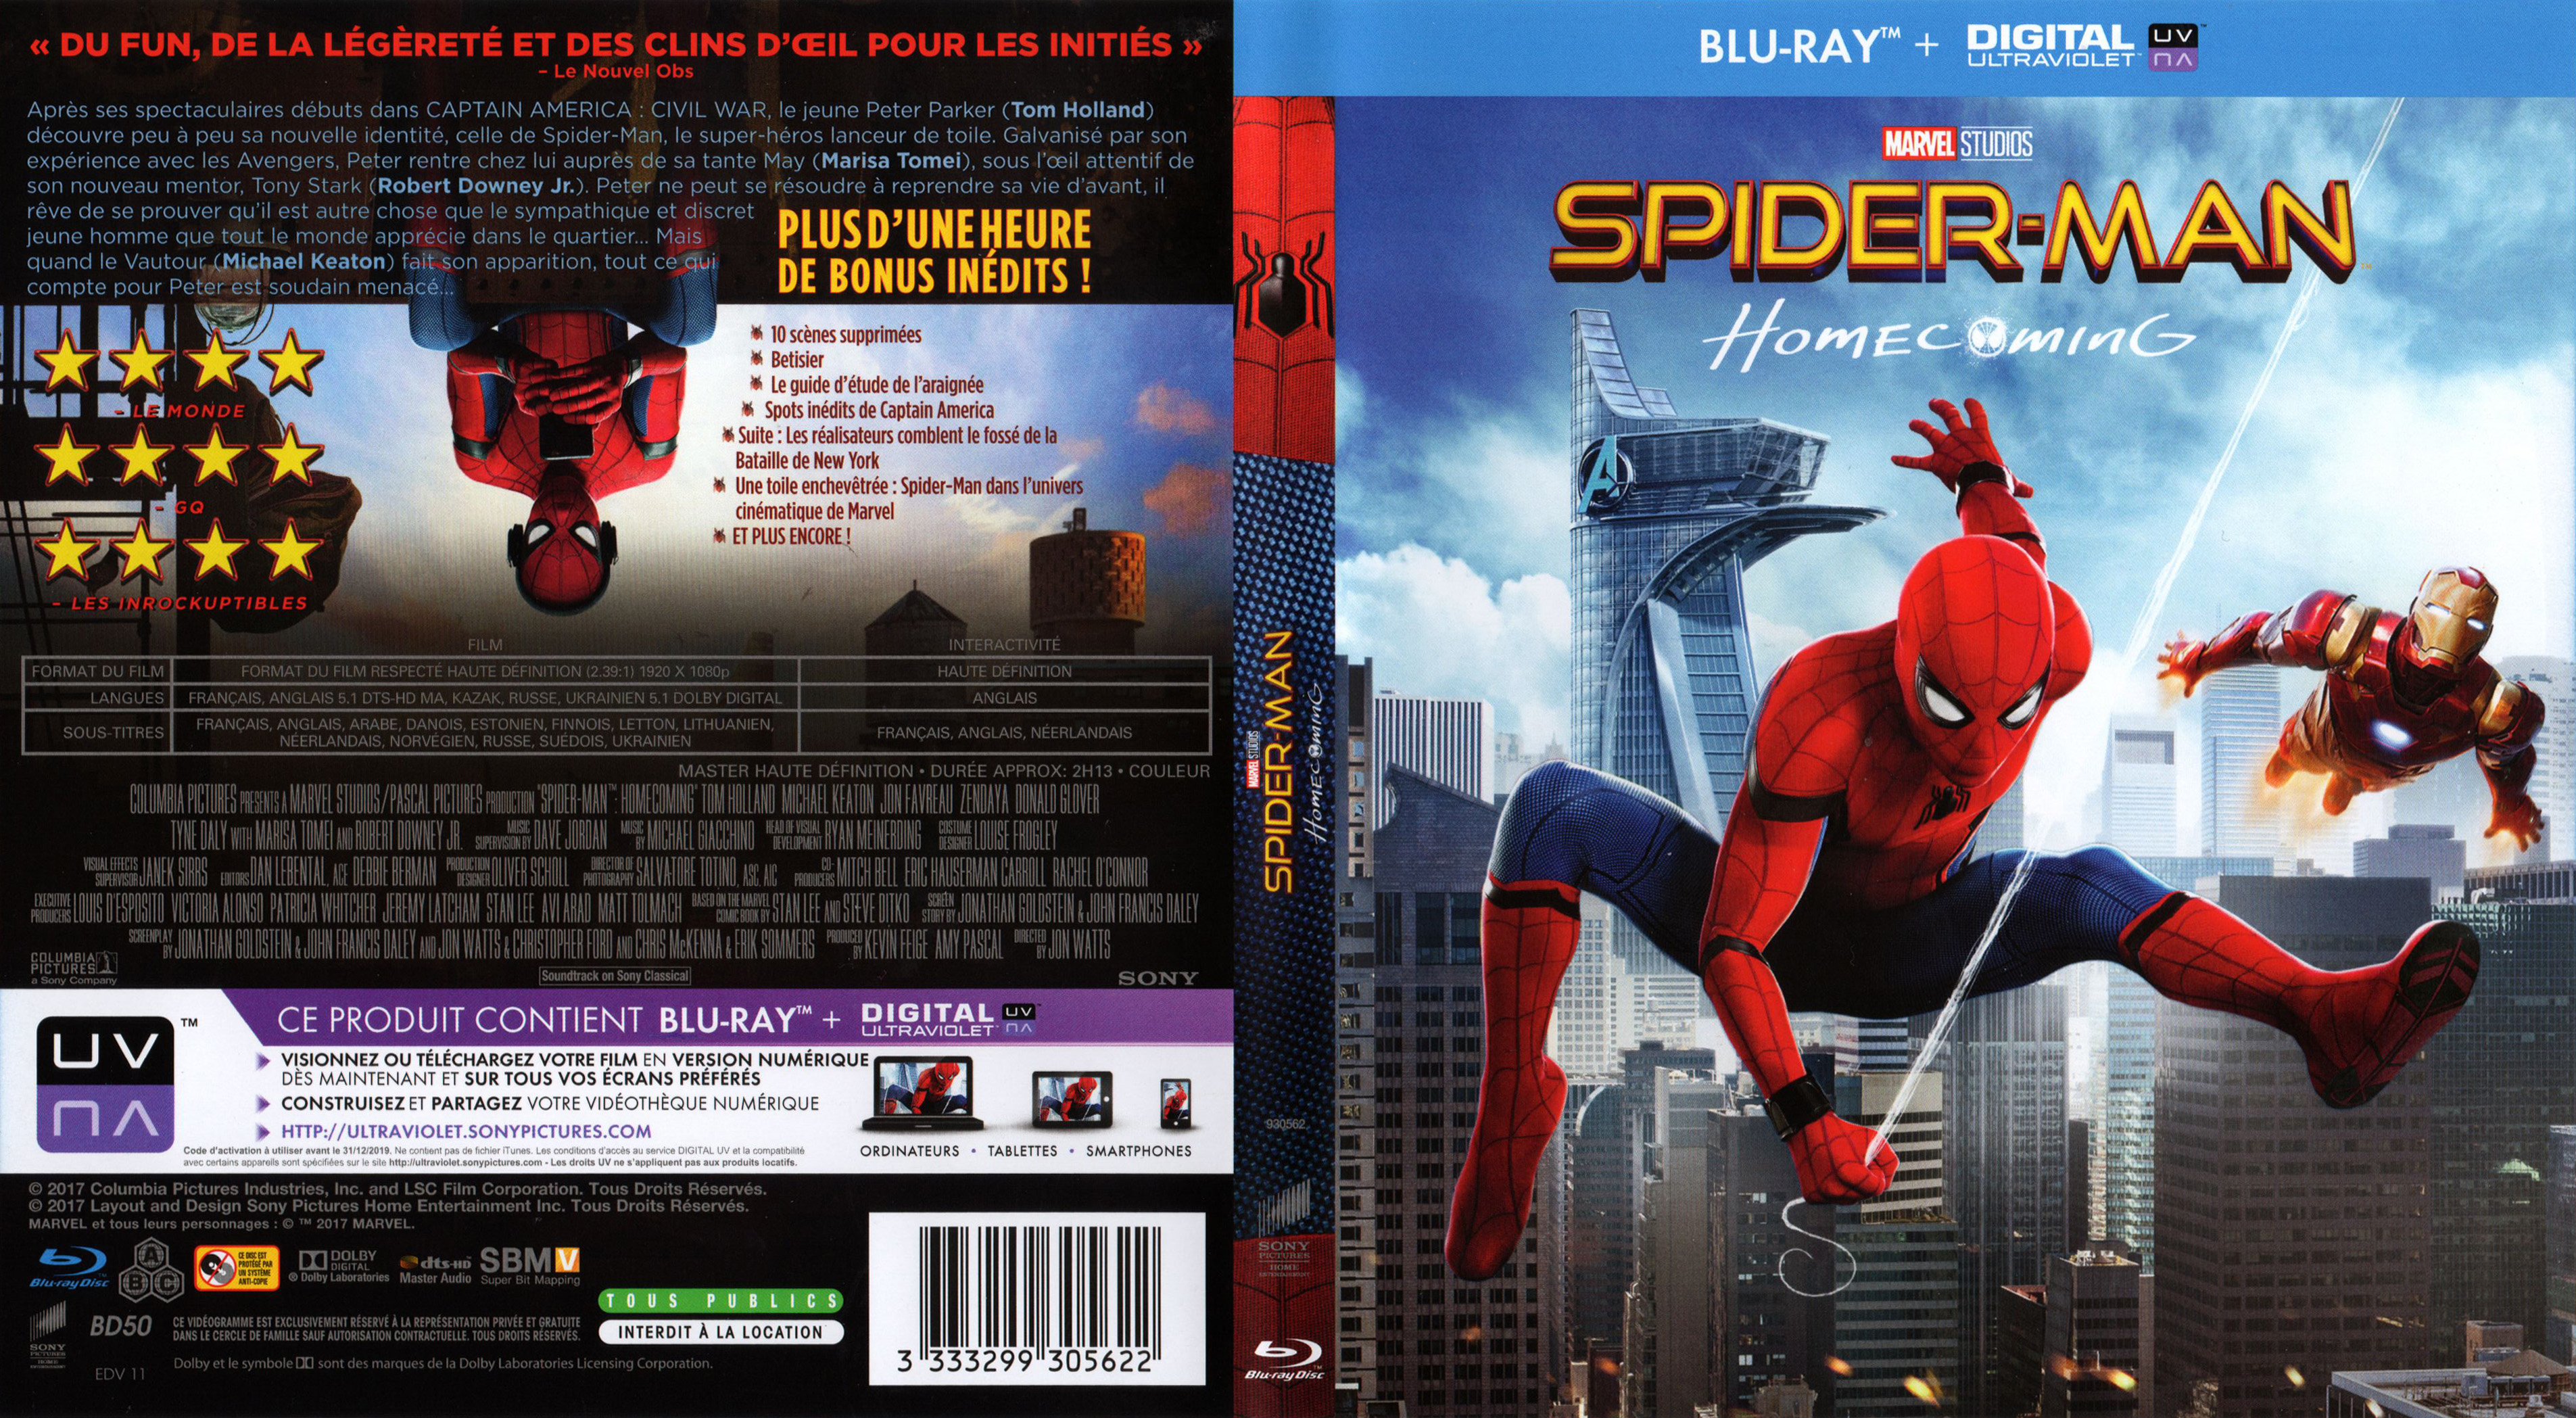 Jaquette Dvd De Spider Man Homecoming Blu Ray Cinéma Passion